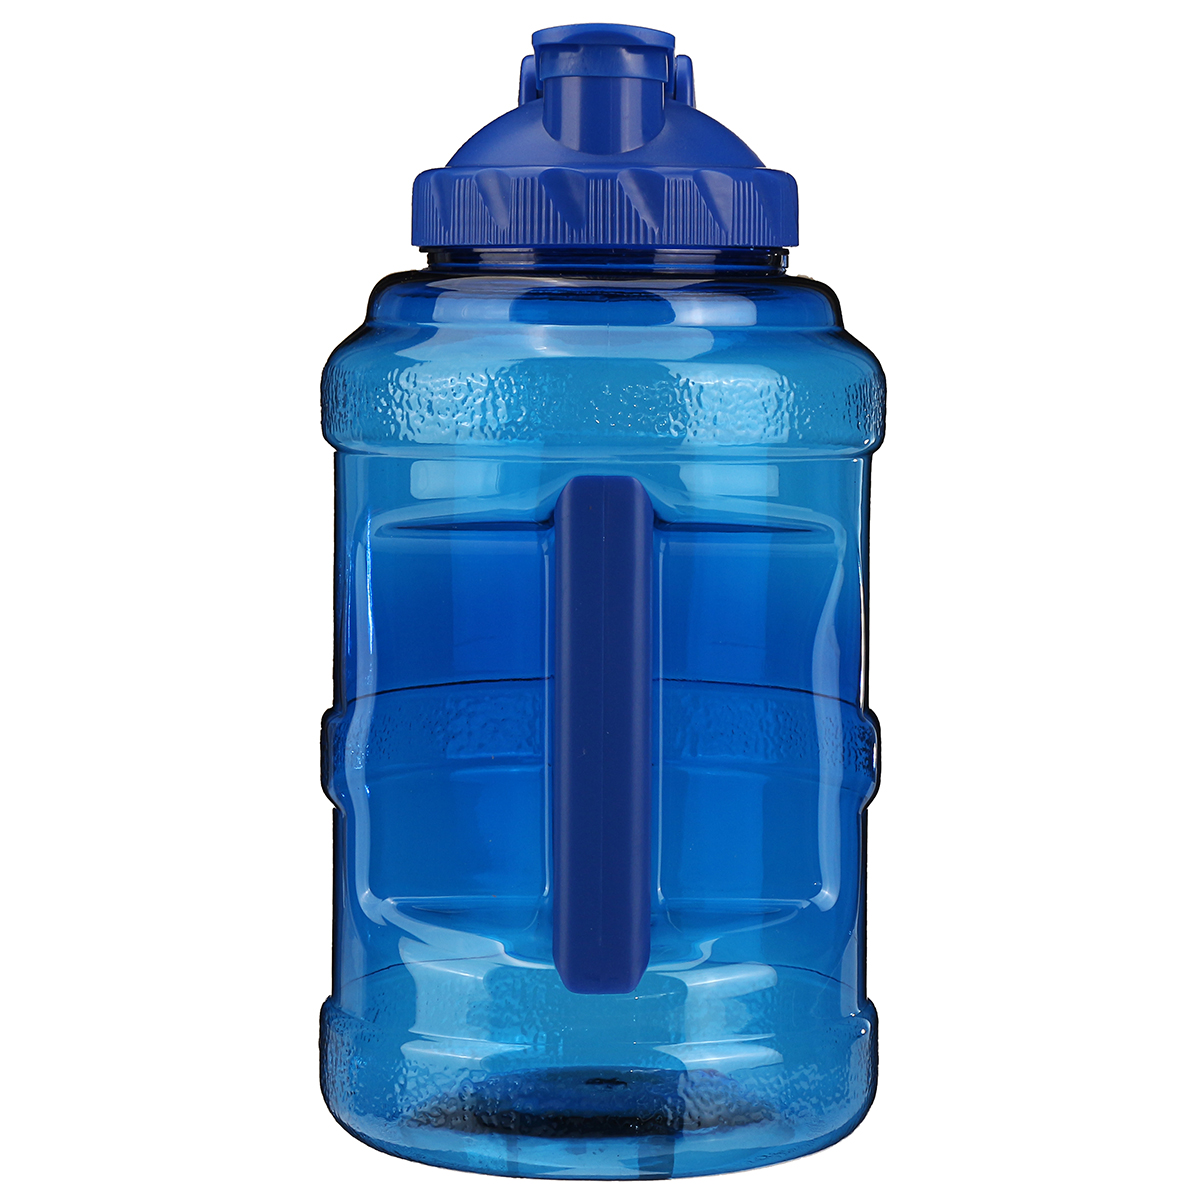 25L-Large-Capacity-Sports-Water-Bottle-with-Handle-PET-Portable-Bucket-Cup-Outdoor-Sports-Fitness-Cu-1898505-3